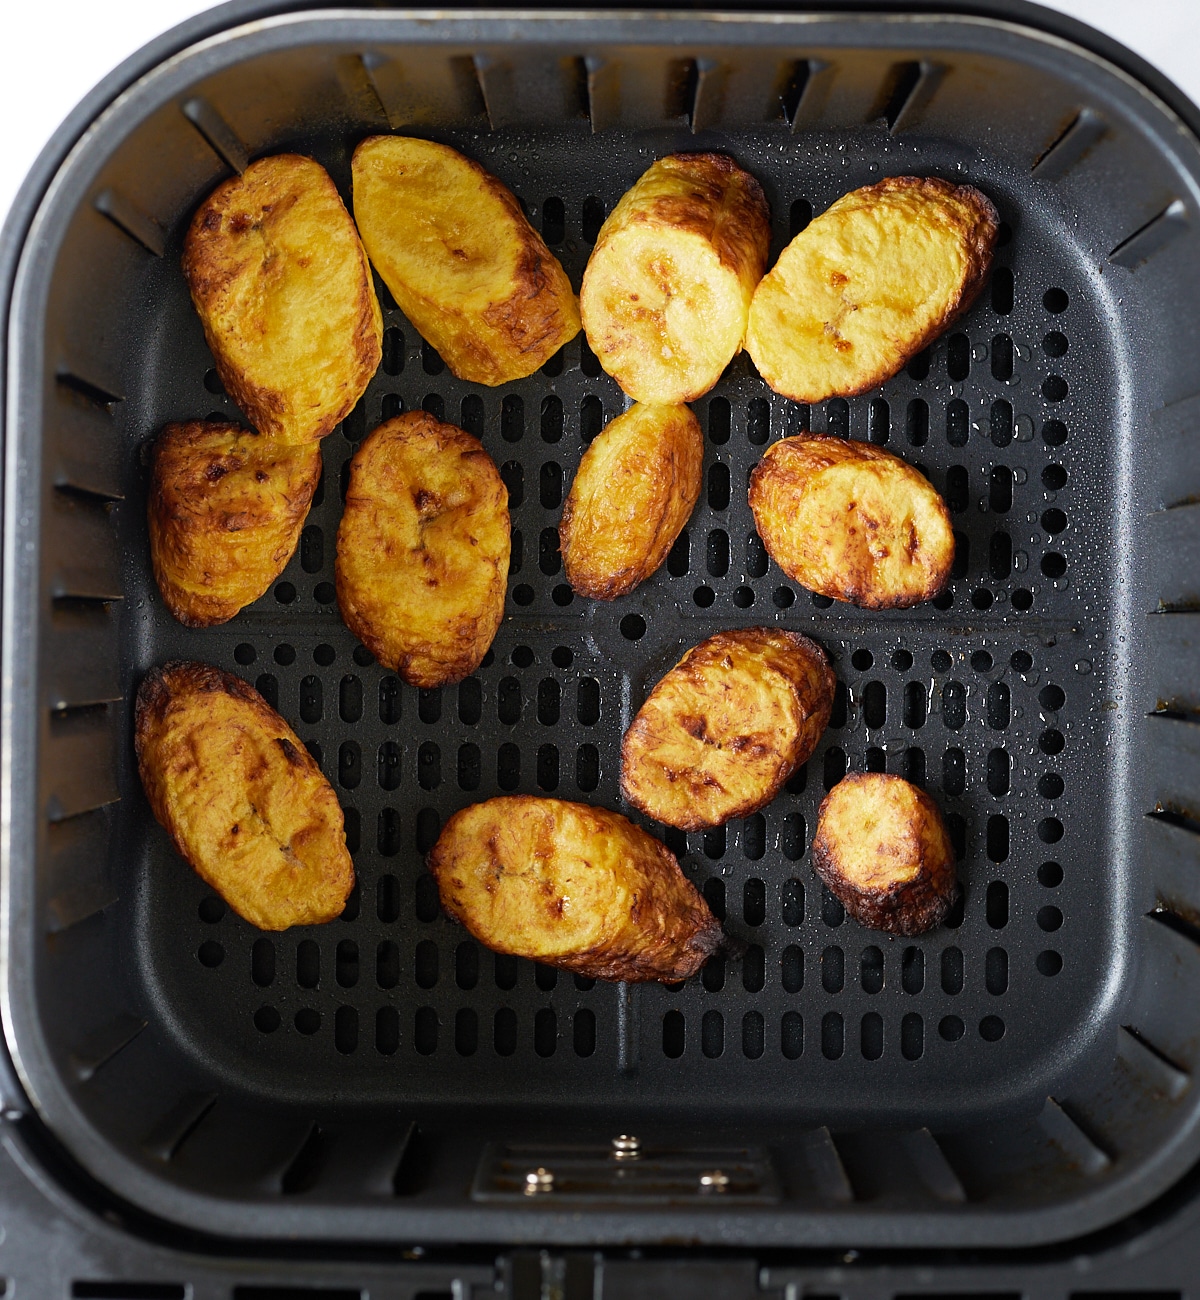 The plantains in the air fryer basket after being cooked.